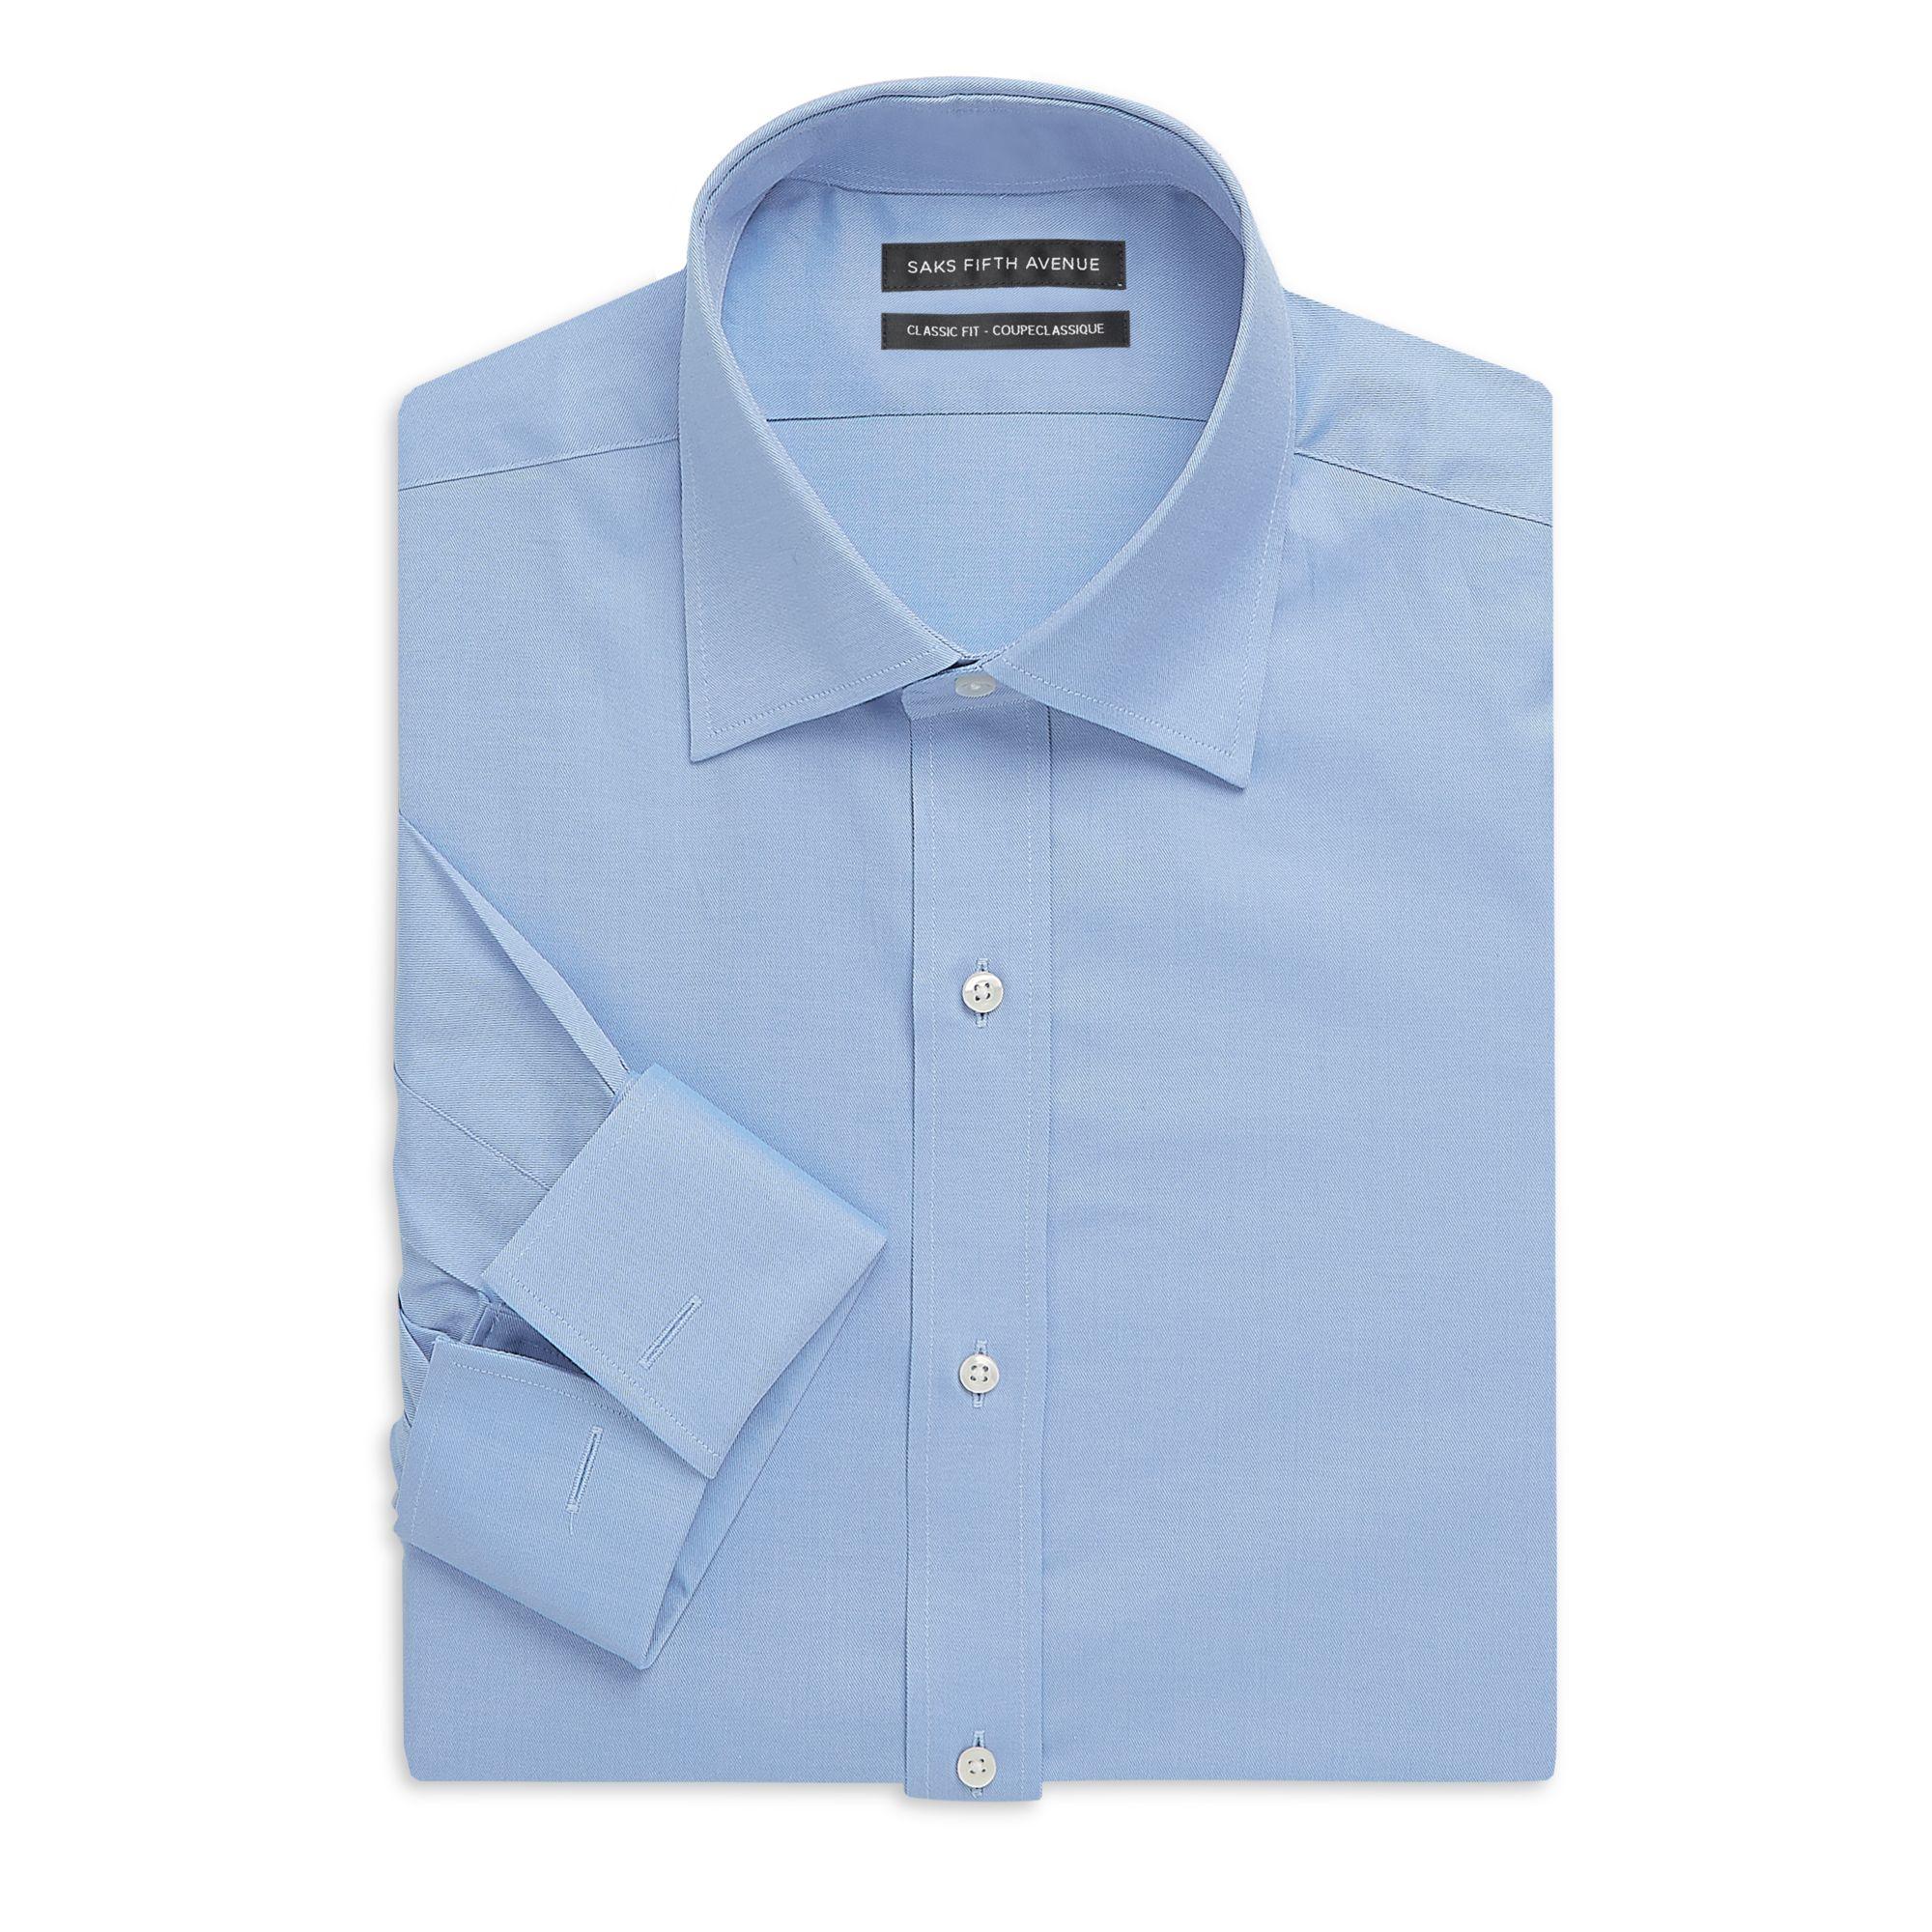 Saks Fifth Avenue Solid Twill Cotton Dress Shirt in Blue for Men - Save ...